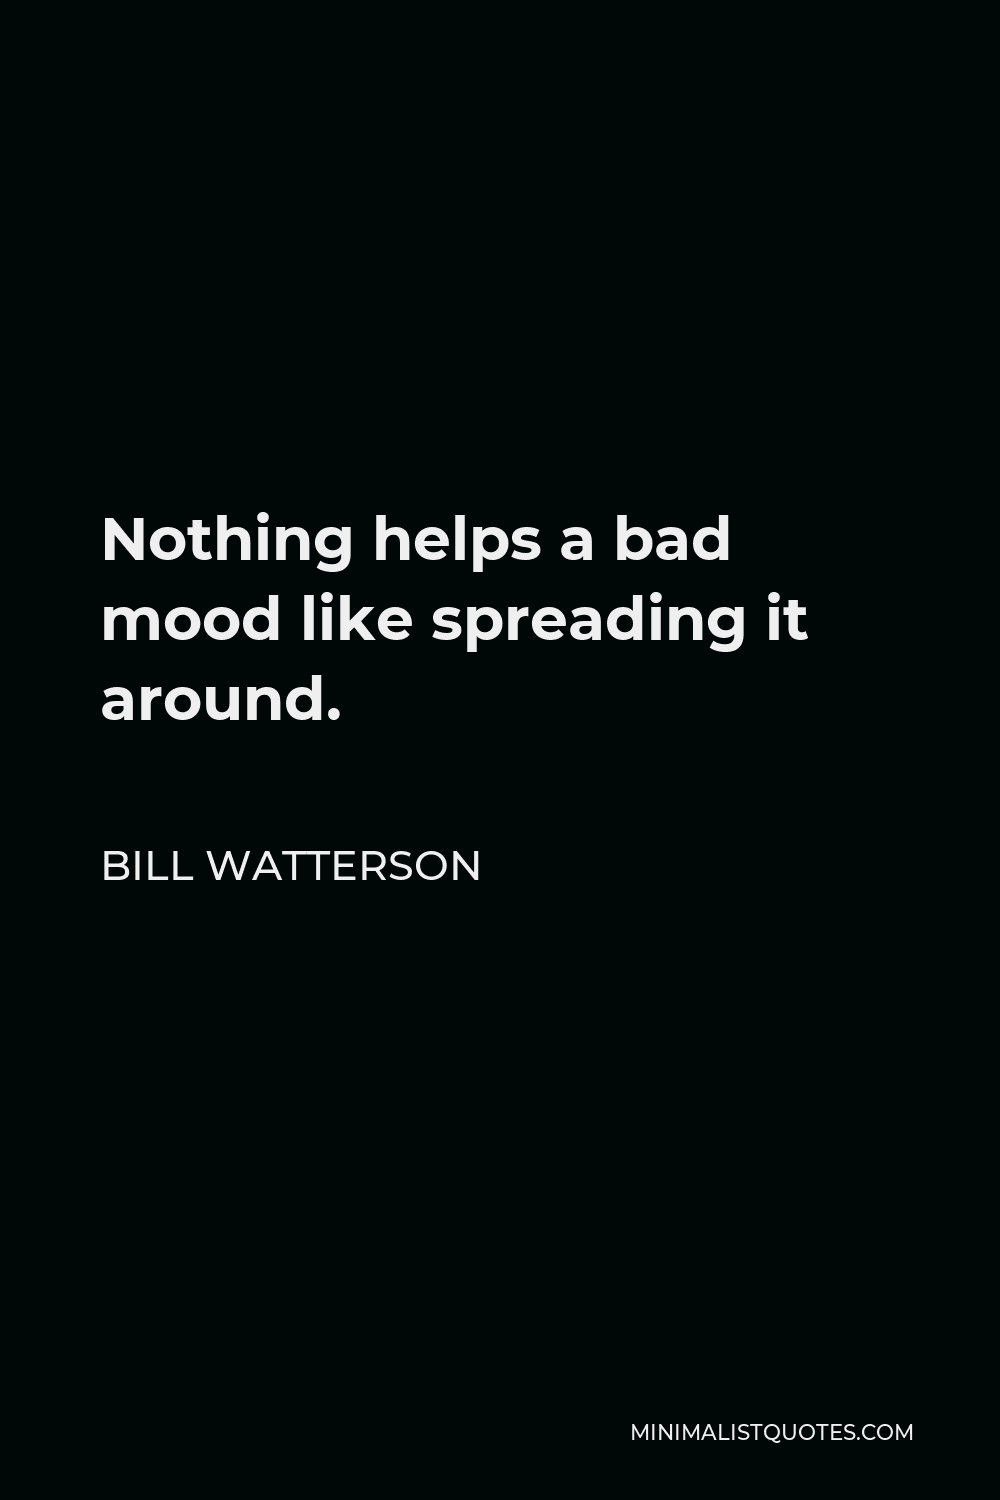 Bill Watterson Quote - Nothing helps a bad mood like spreading it around.